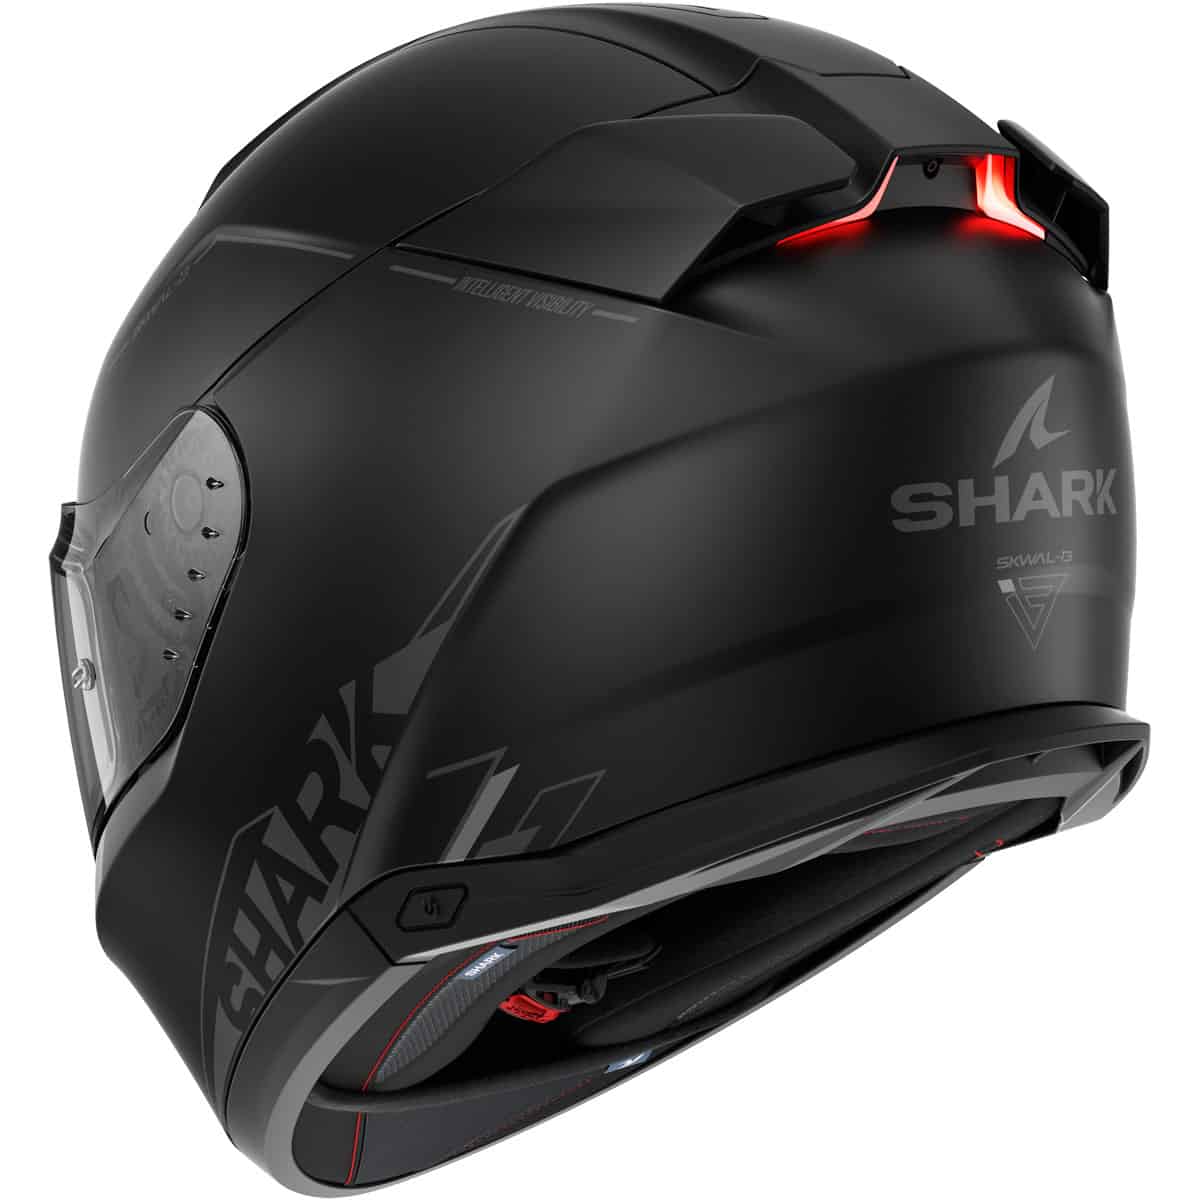 The Shark Skwal i3 helmet is the world's 1st helmet with integrated brake lights. This revolutionary full face helmet from Shark is a true marvel of modern engineering, merging the essential requirements of the ECE 22-06 certification with an eye-catching, motorsport-inspired design and cutting-edge LED lighting.  3